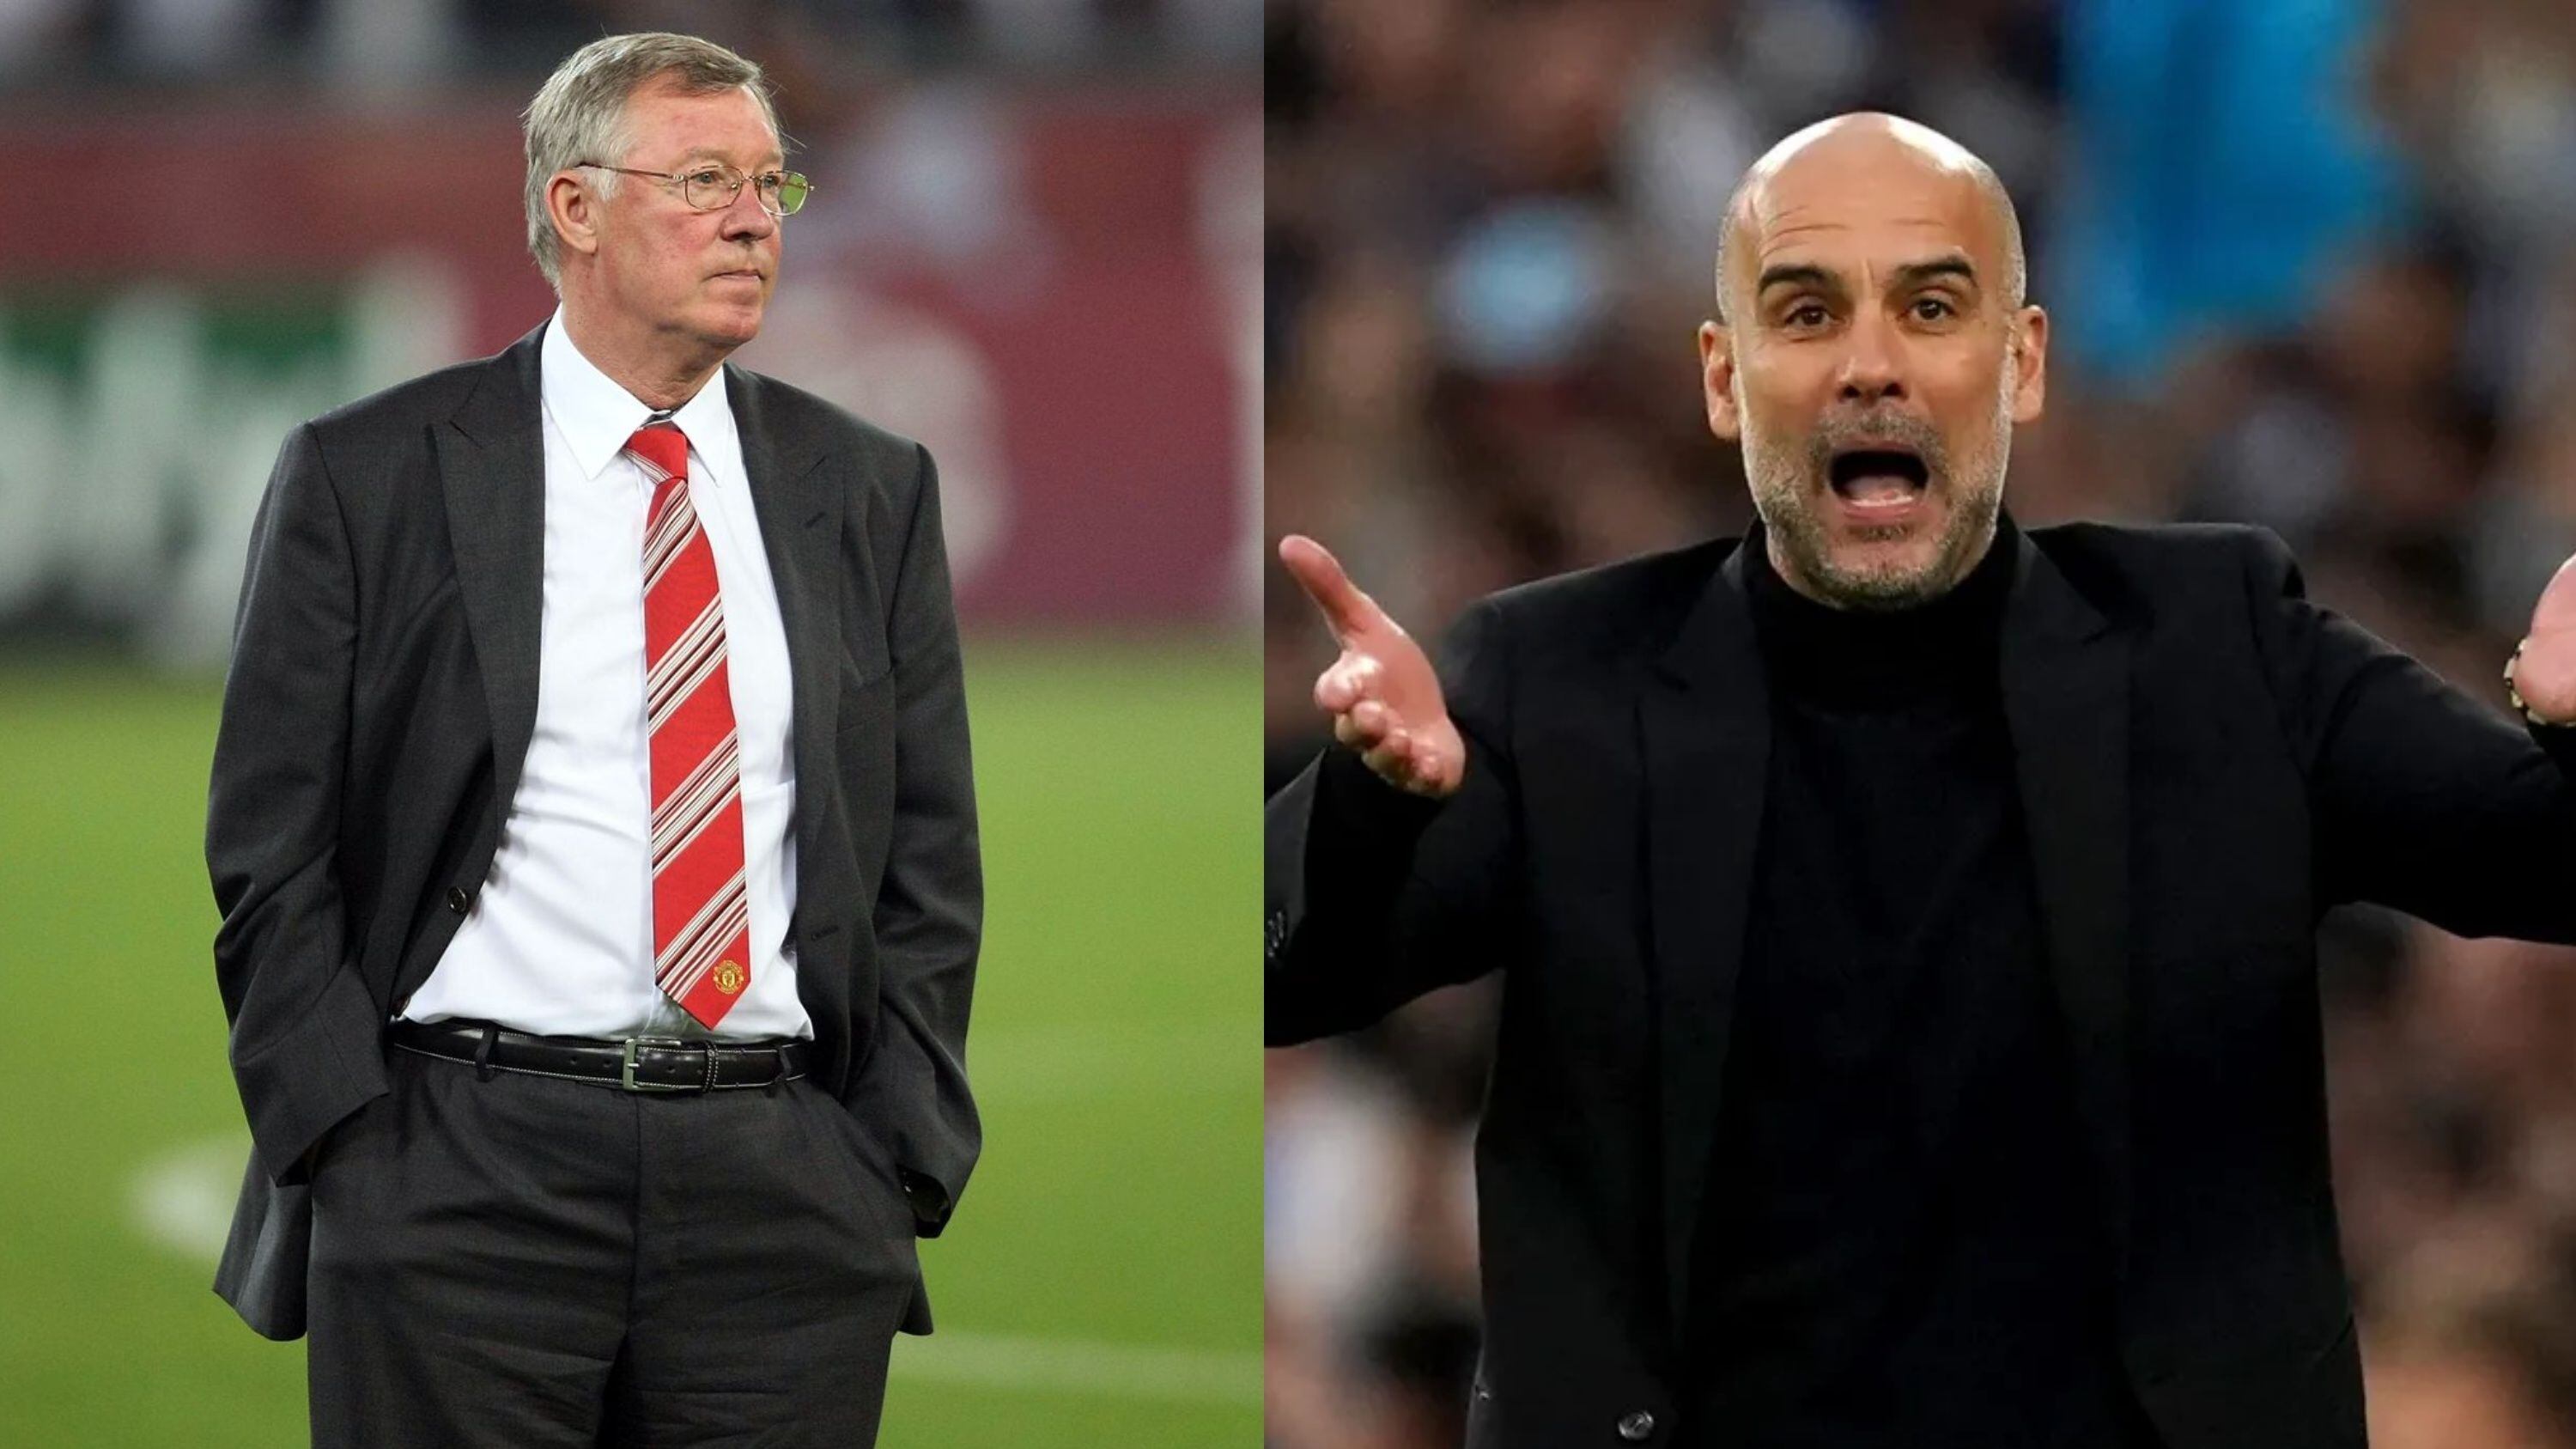 After Manchester United got beaten, what Ferguson did when he saw Pep Guardiola